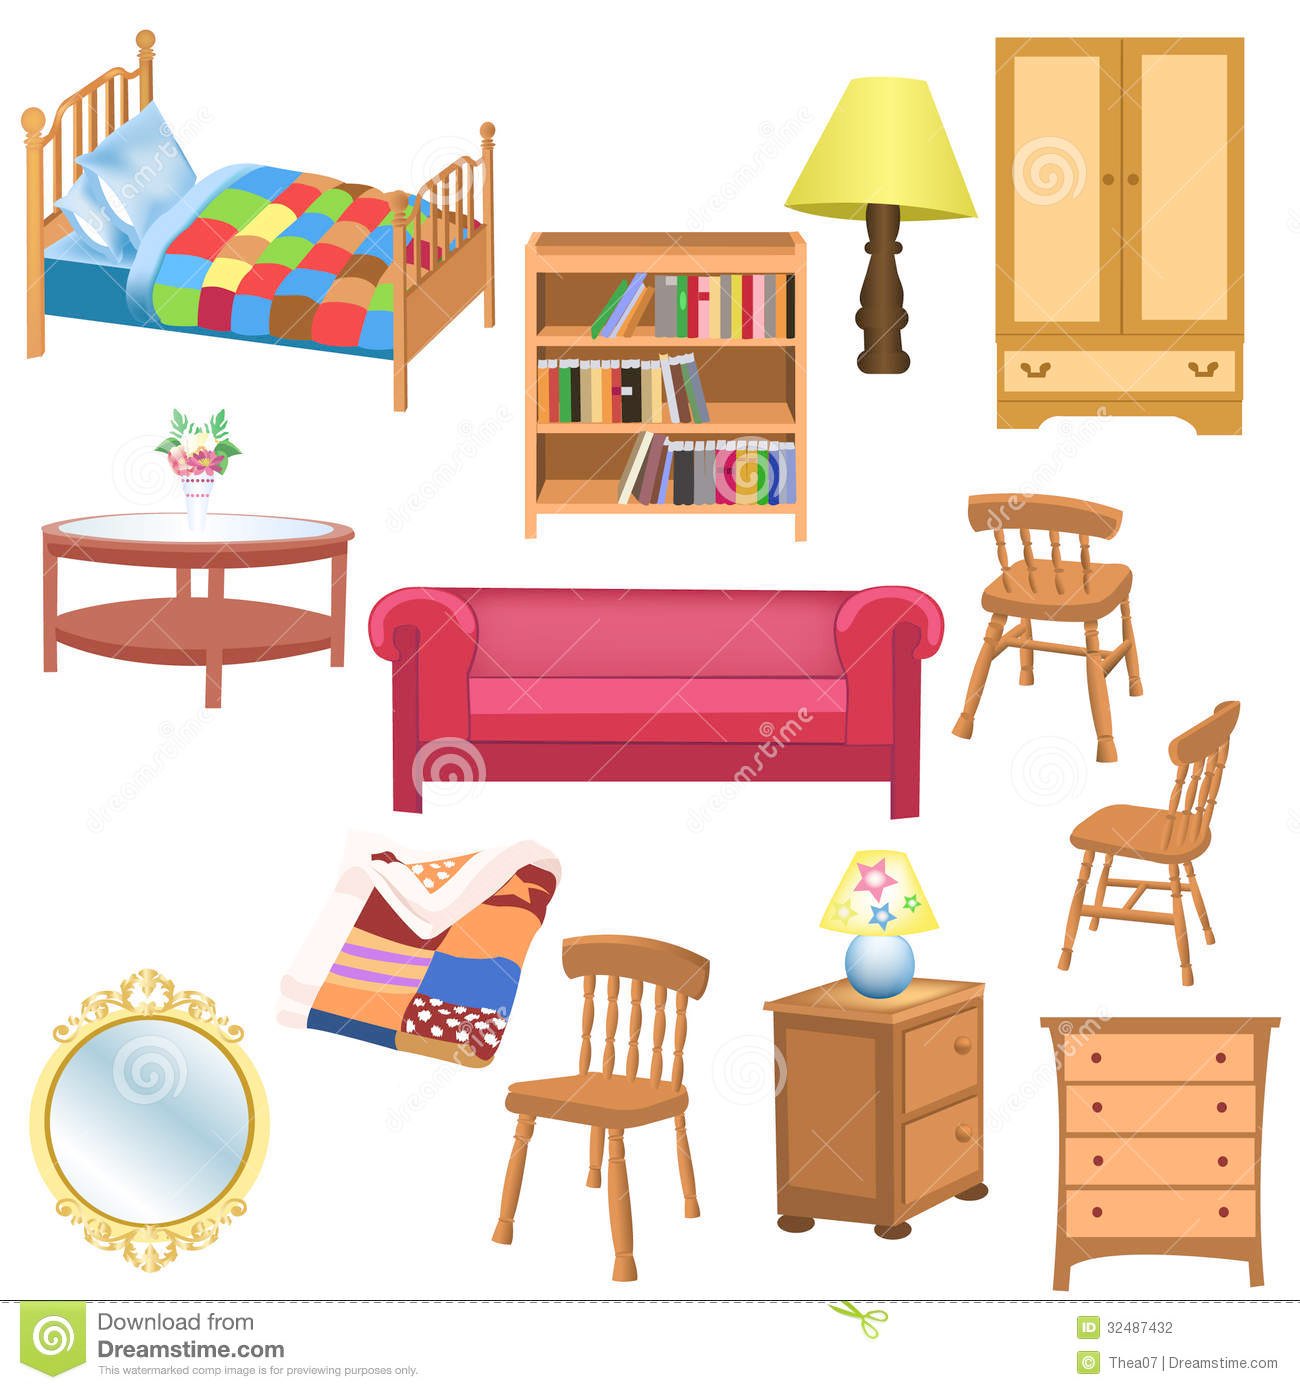 Things in the bedroom clipart